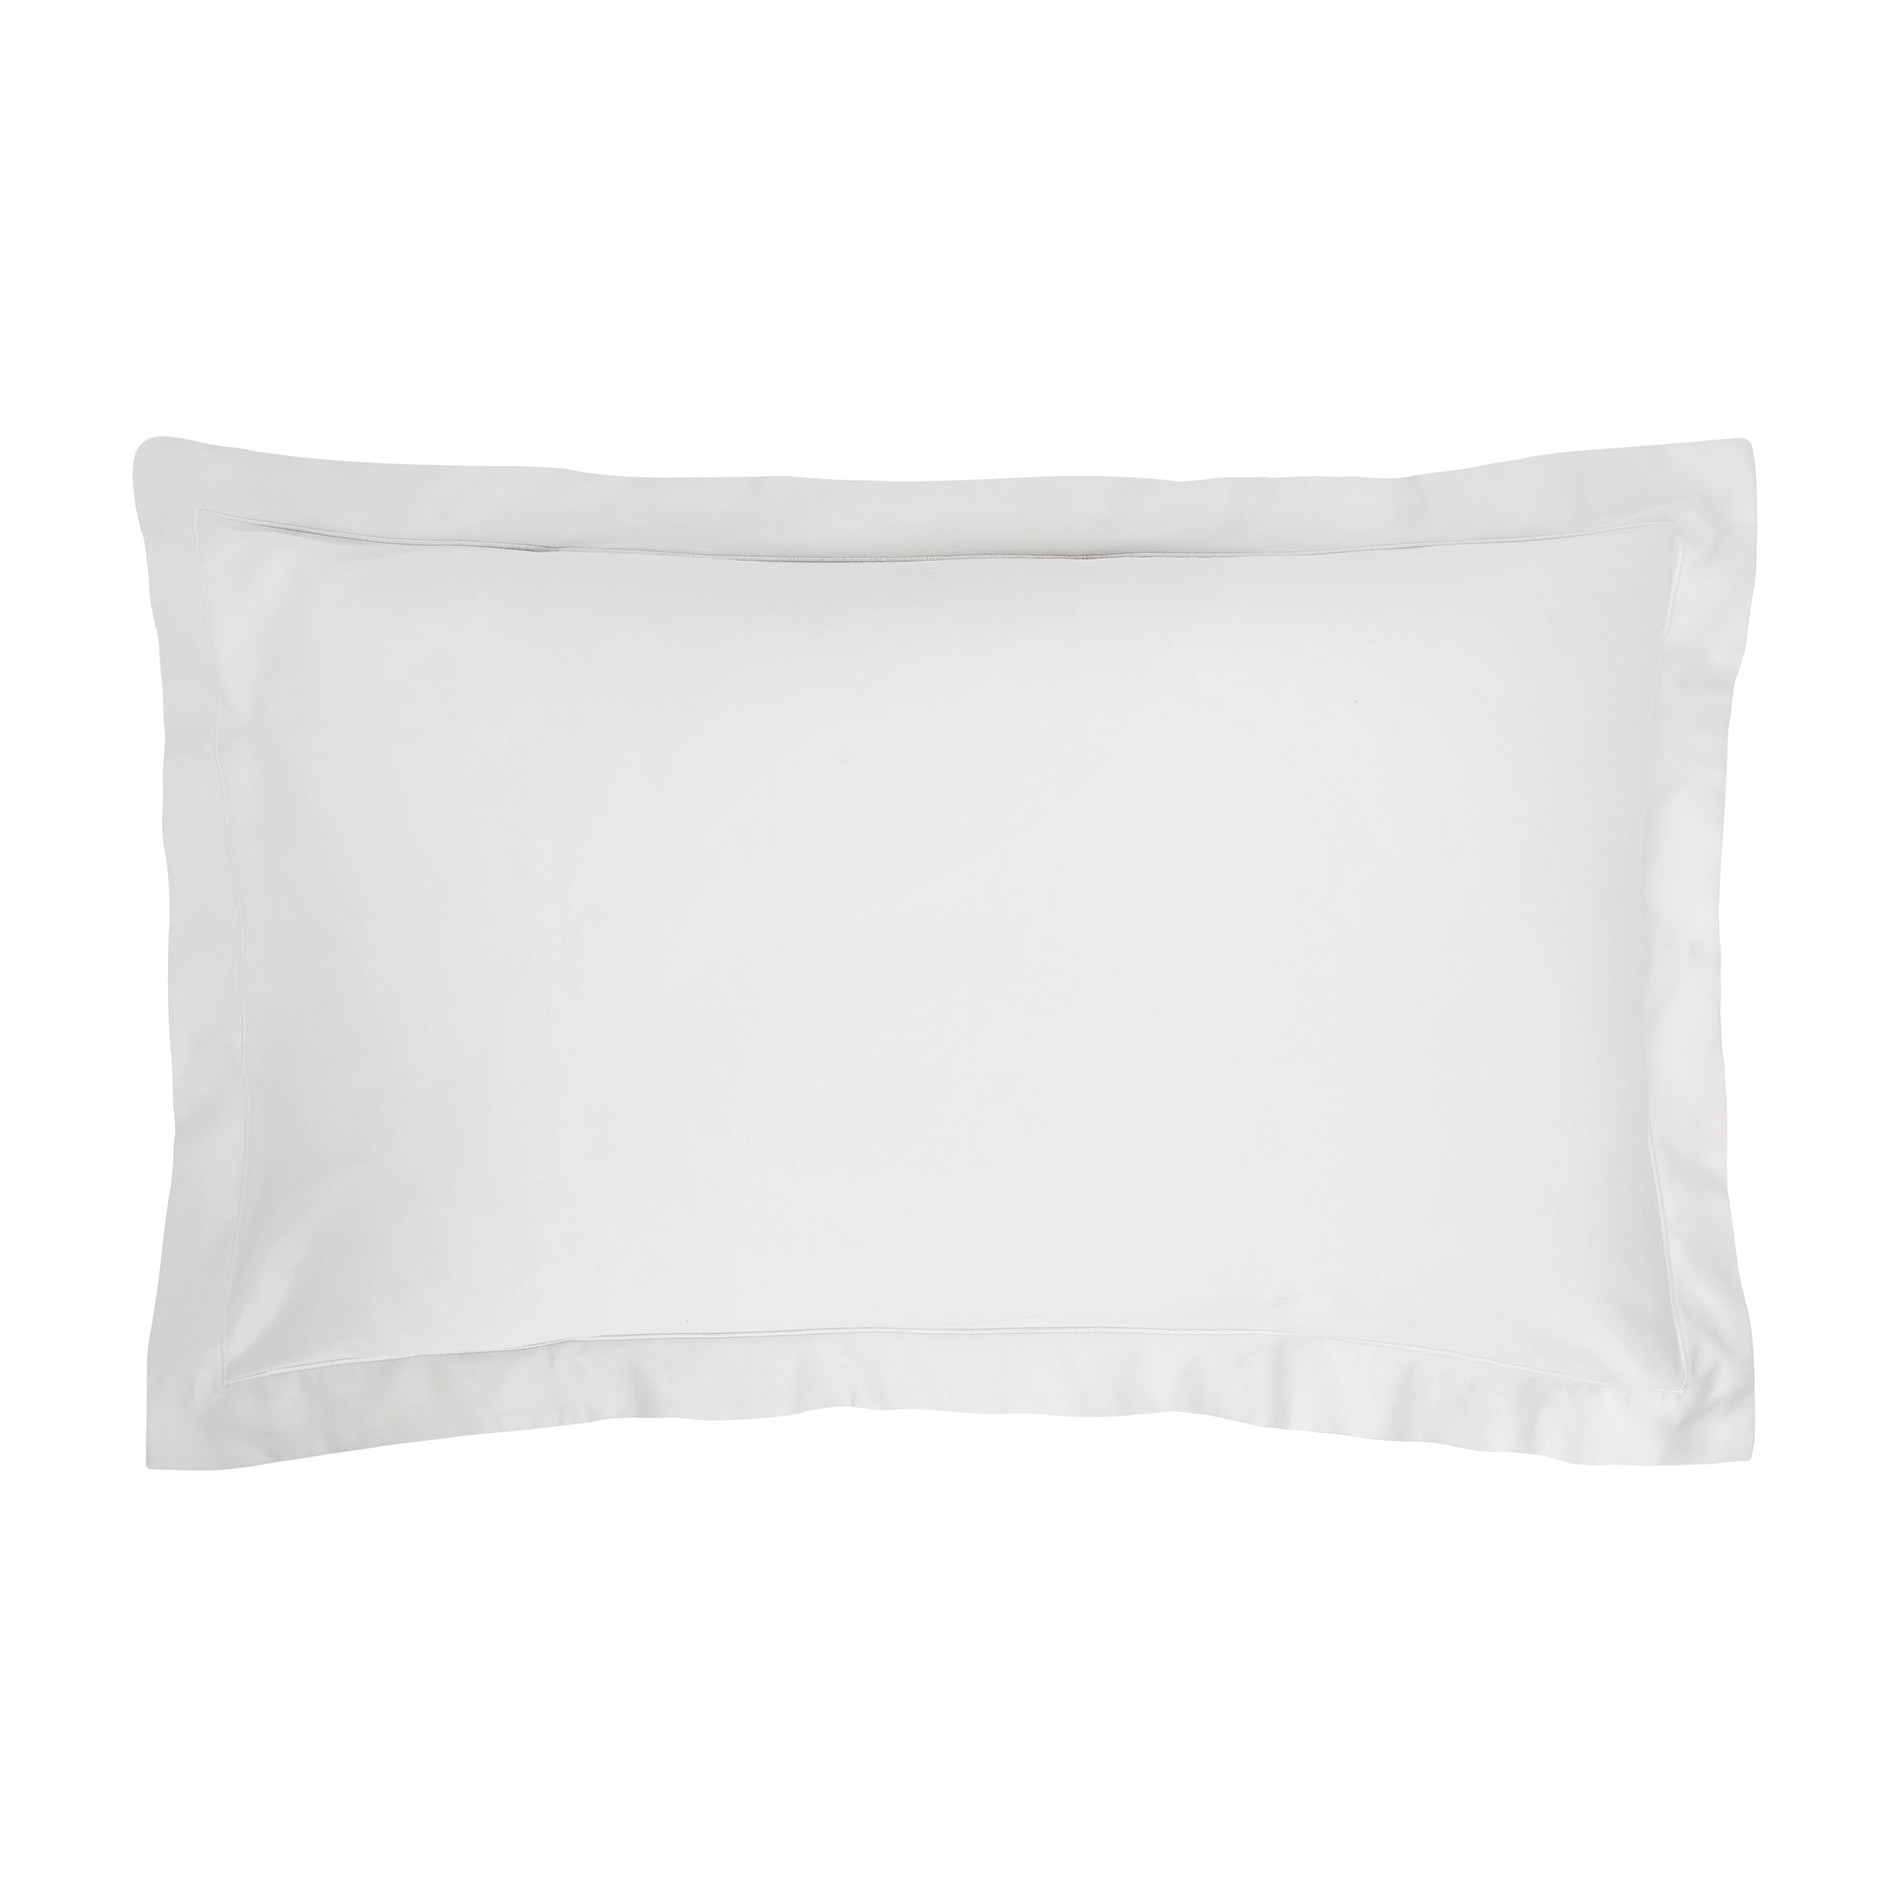 Pillowcase in TC400 satin cotton, Pearl Grey, large image number 0